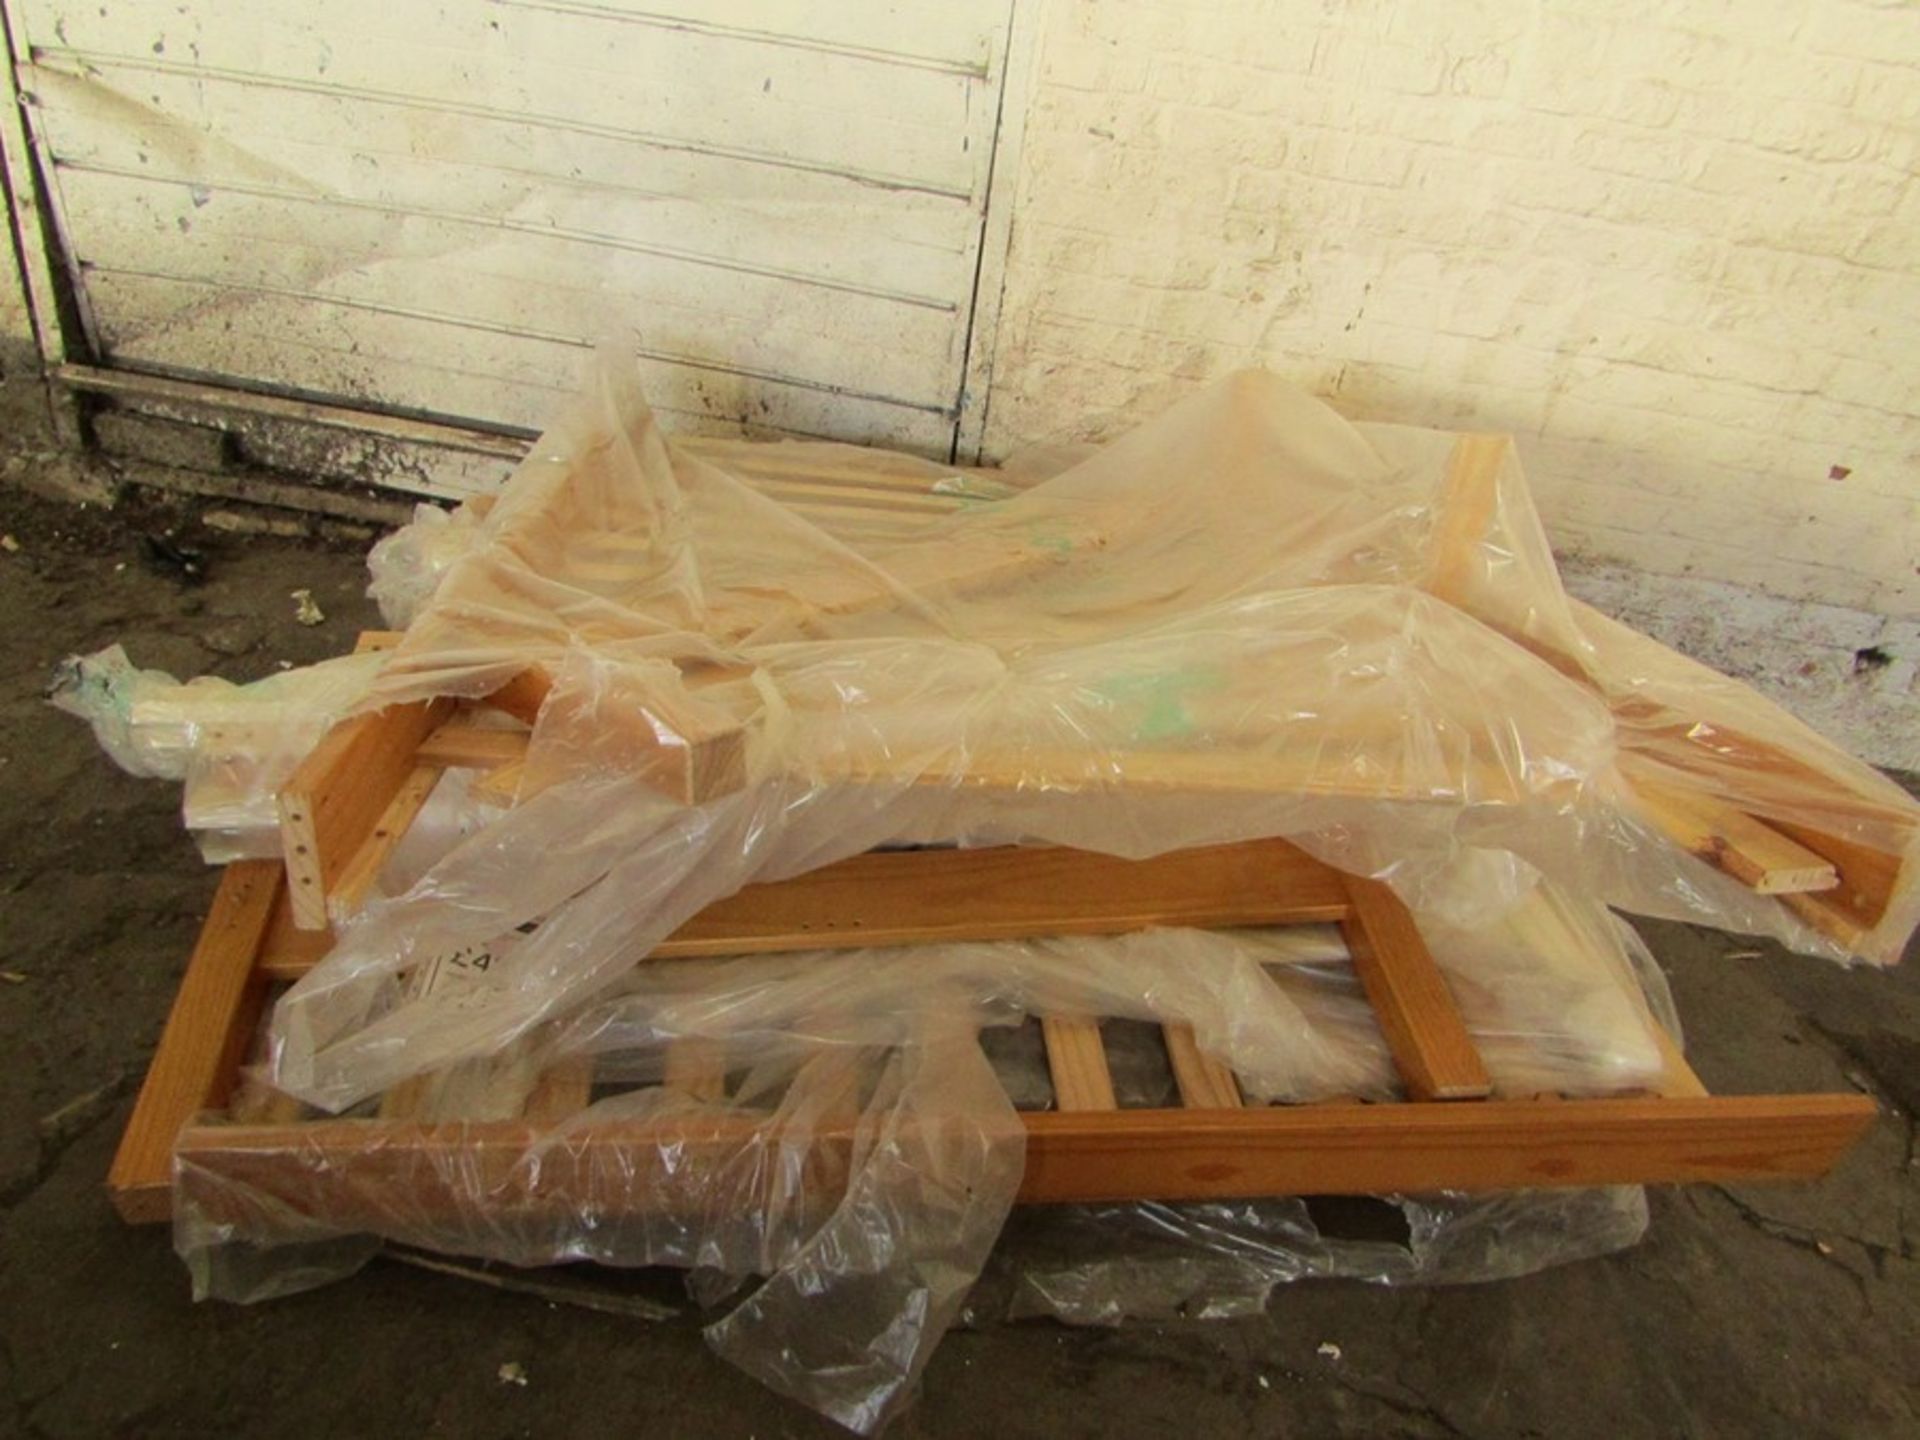 Pallet of parts to 2 Double wooden bed frames, completely unchecked